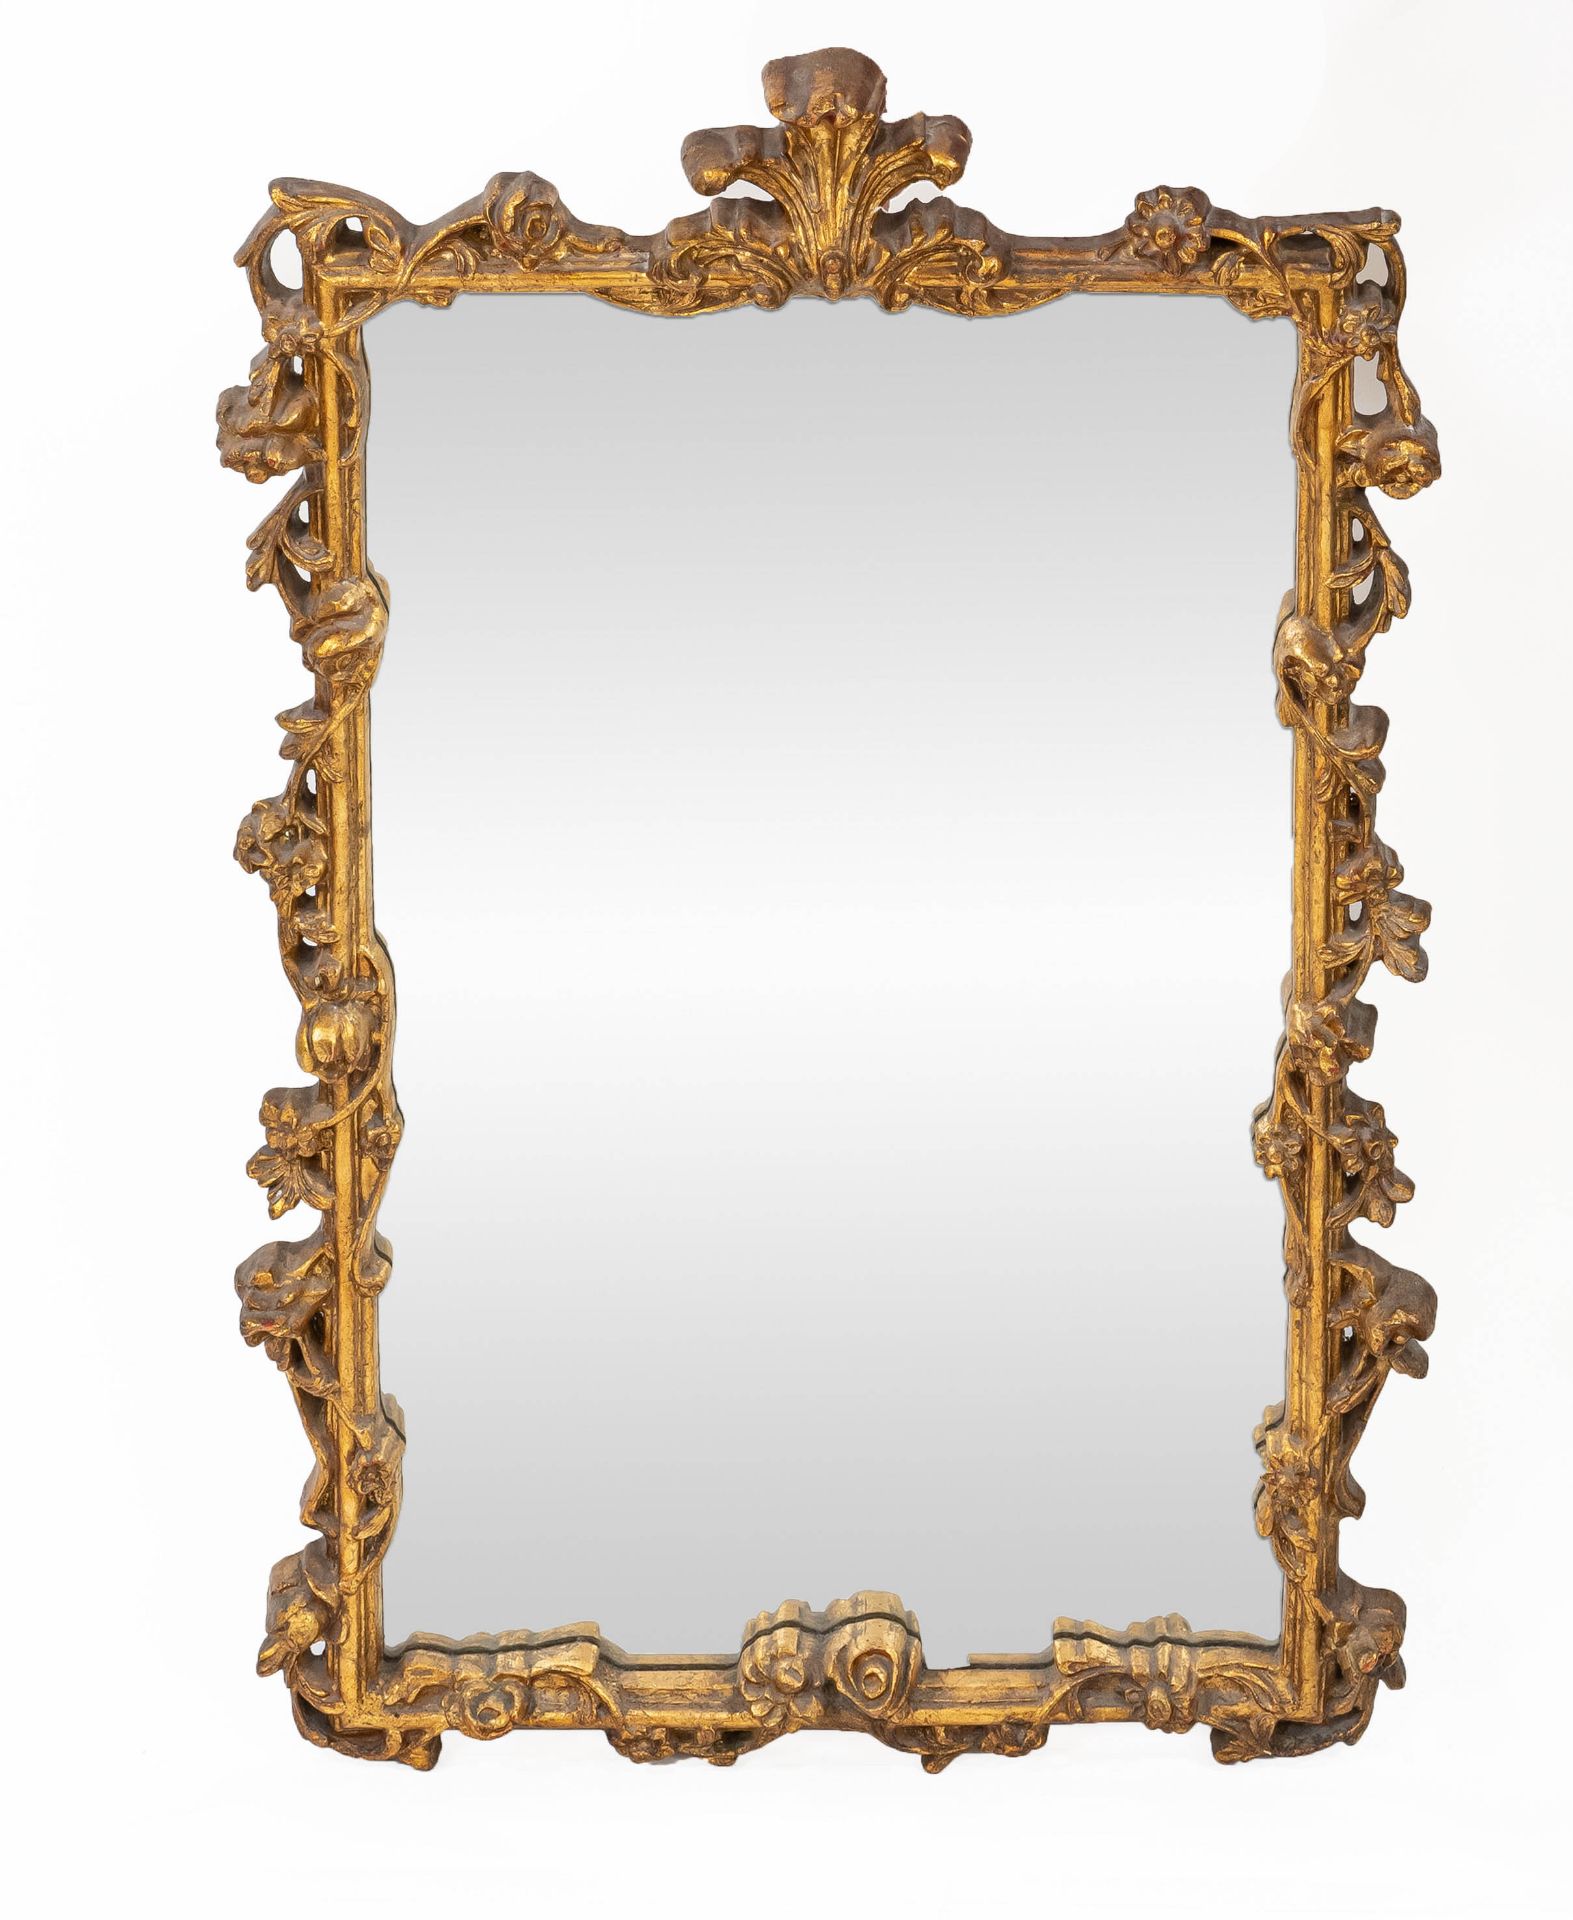 Baroque style wall mirror, 20th century, wood carved and gilded, 100 x 60 cm